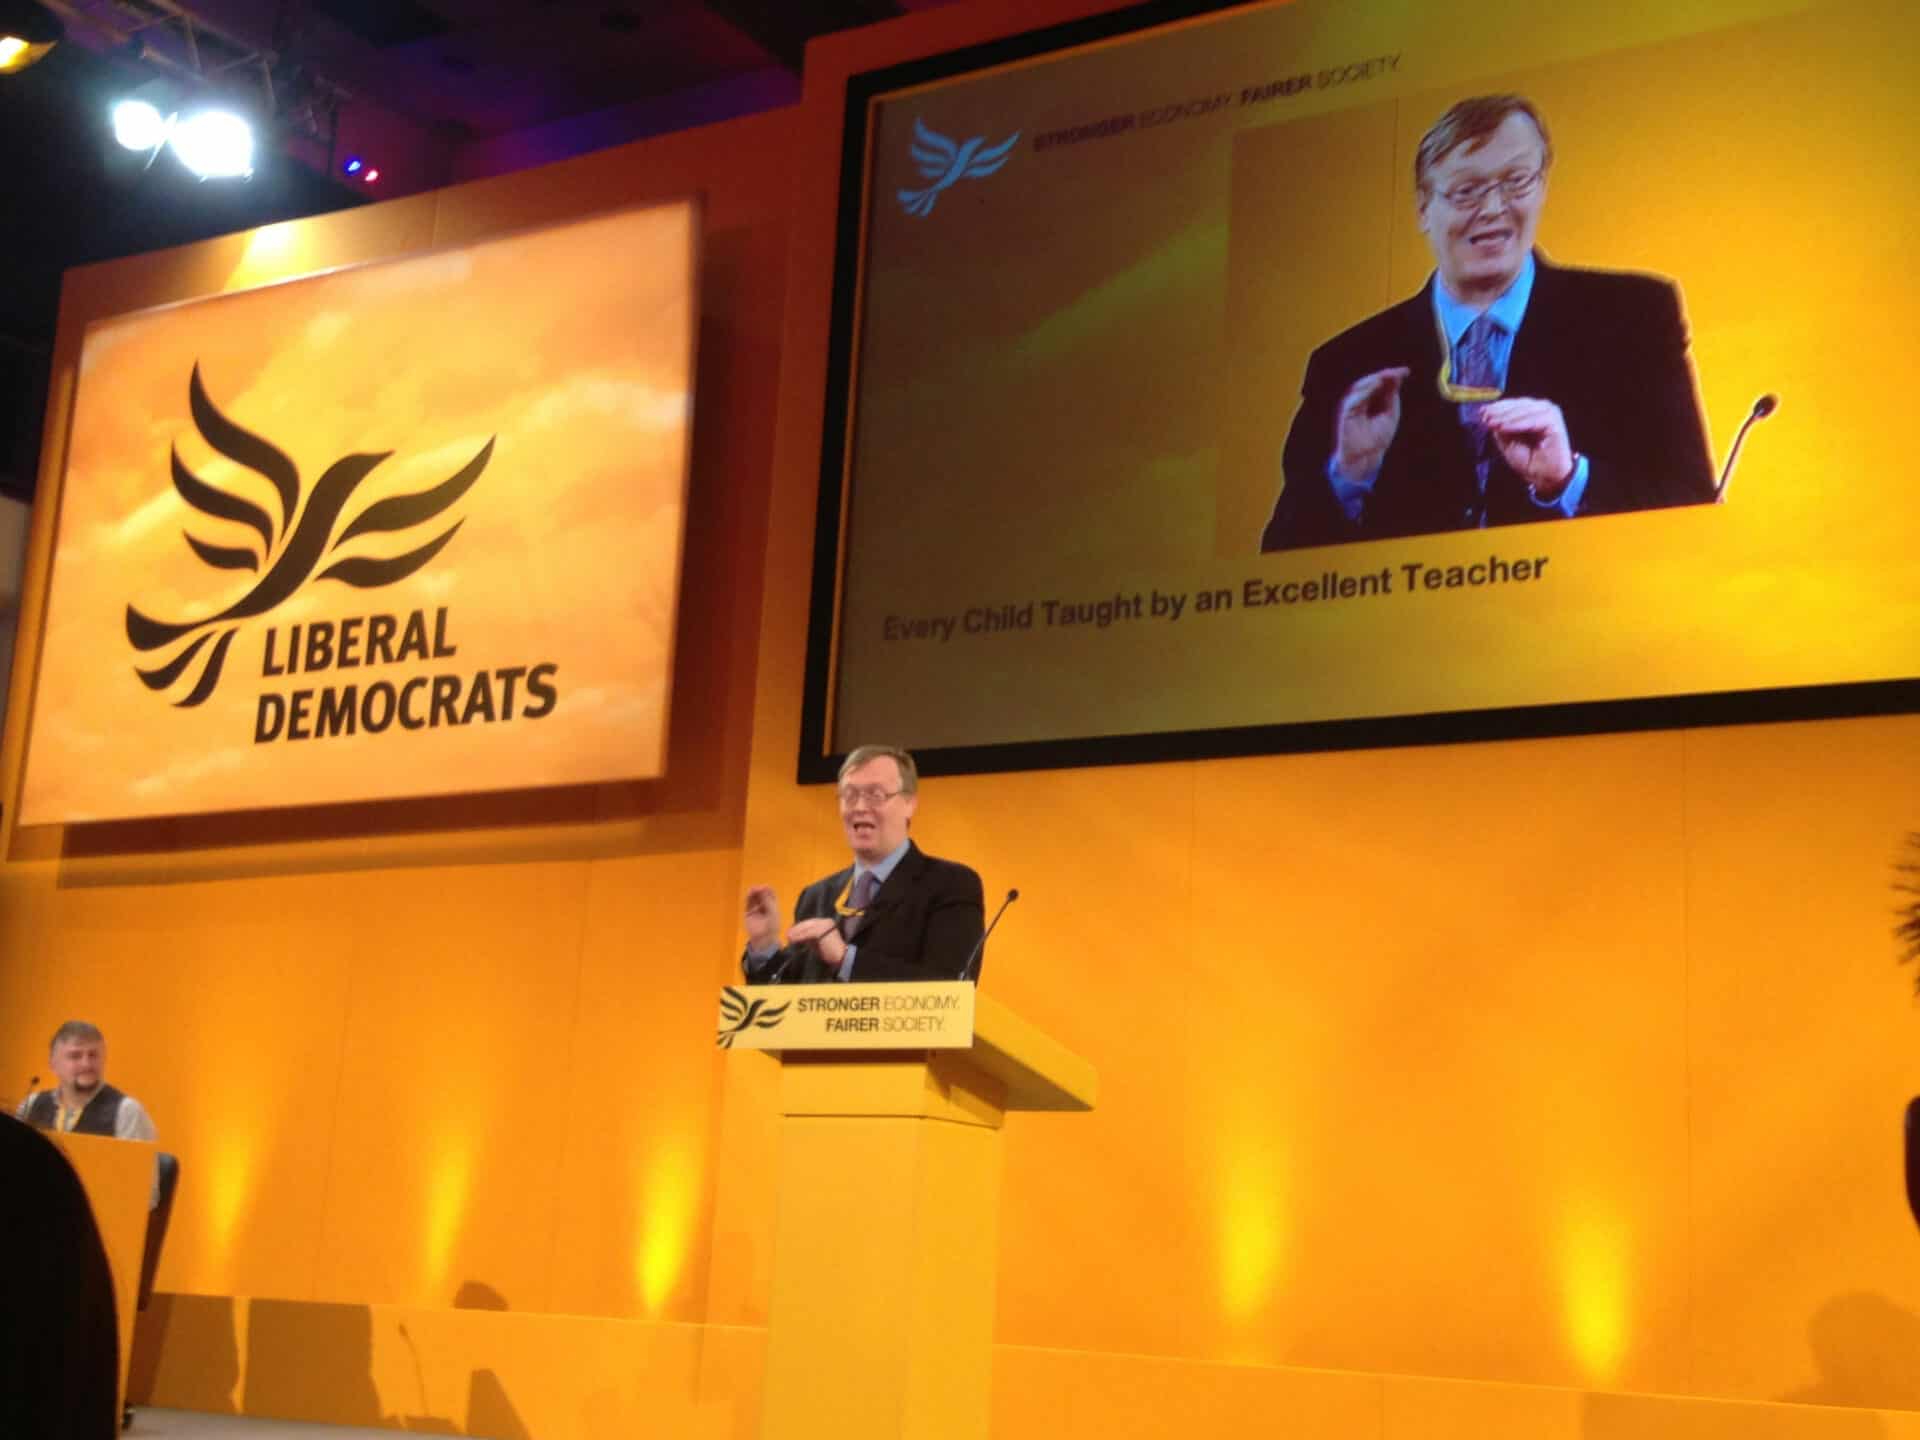 A man speaks at a podium with a liberal democrats logo, with a large screen behind him displaying the same scene and text about education.